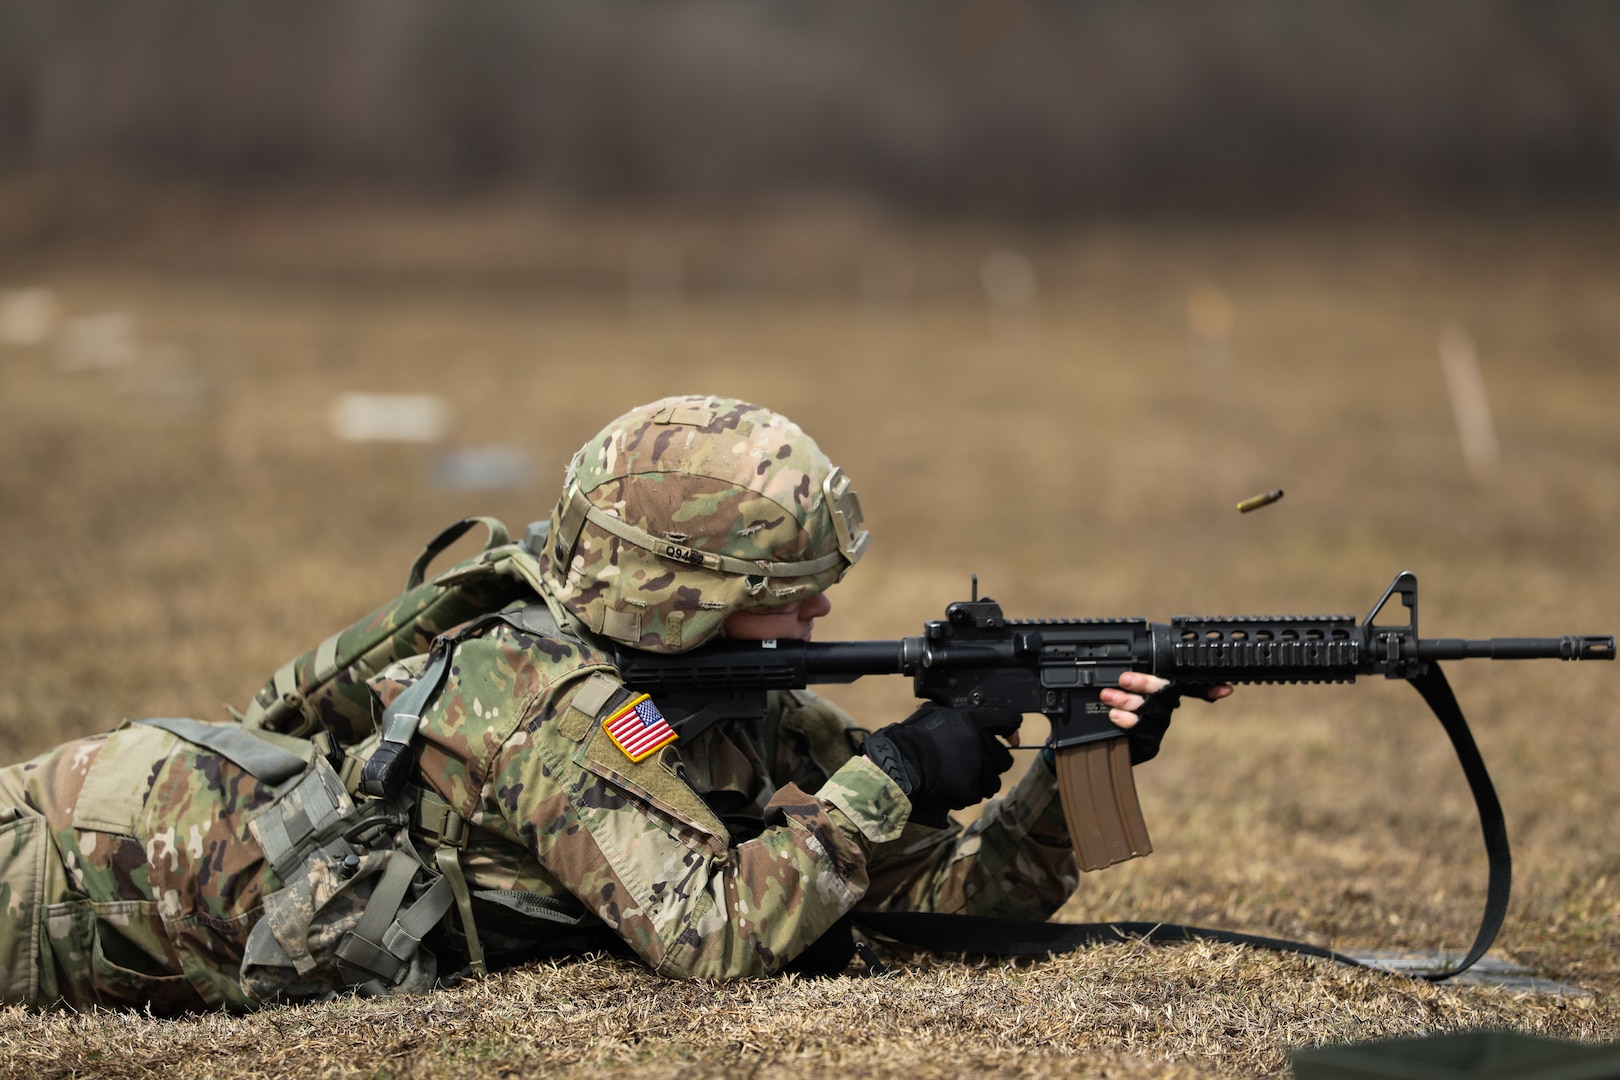 An Oklahoma Army National Guard Soldier shoots targets during a weapons skills challenge at the Best Warrior Competition at Camp Gruber Training Center, Oklahoma, March 4, 2022. Soldiers tested their proficiency in a variety of warrior tasks and drills during the annual three-day event.